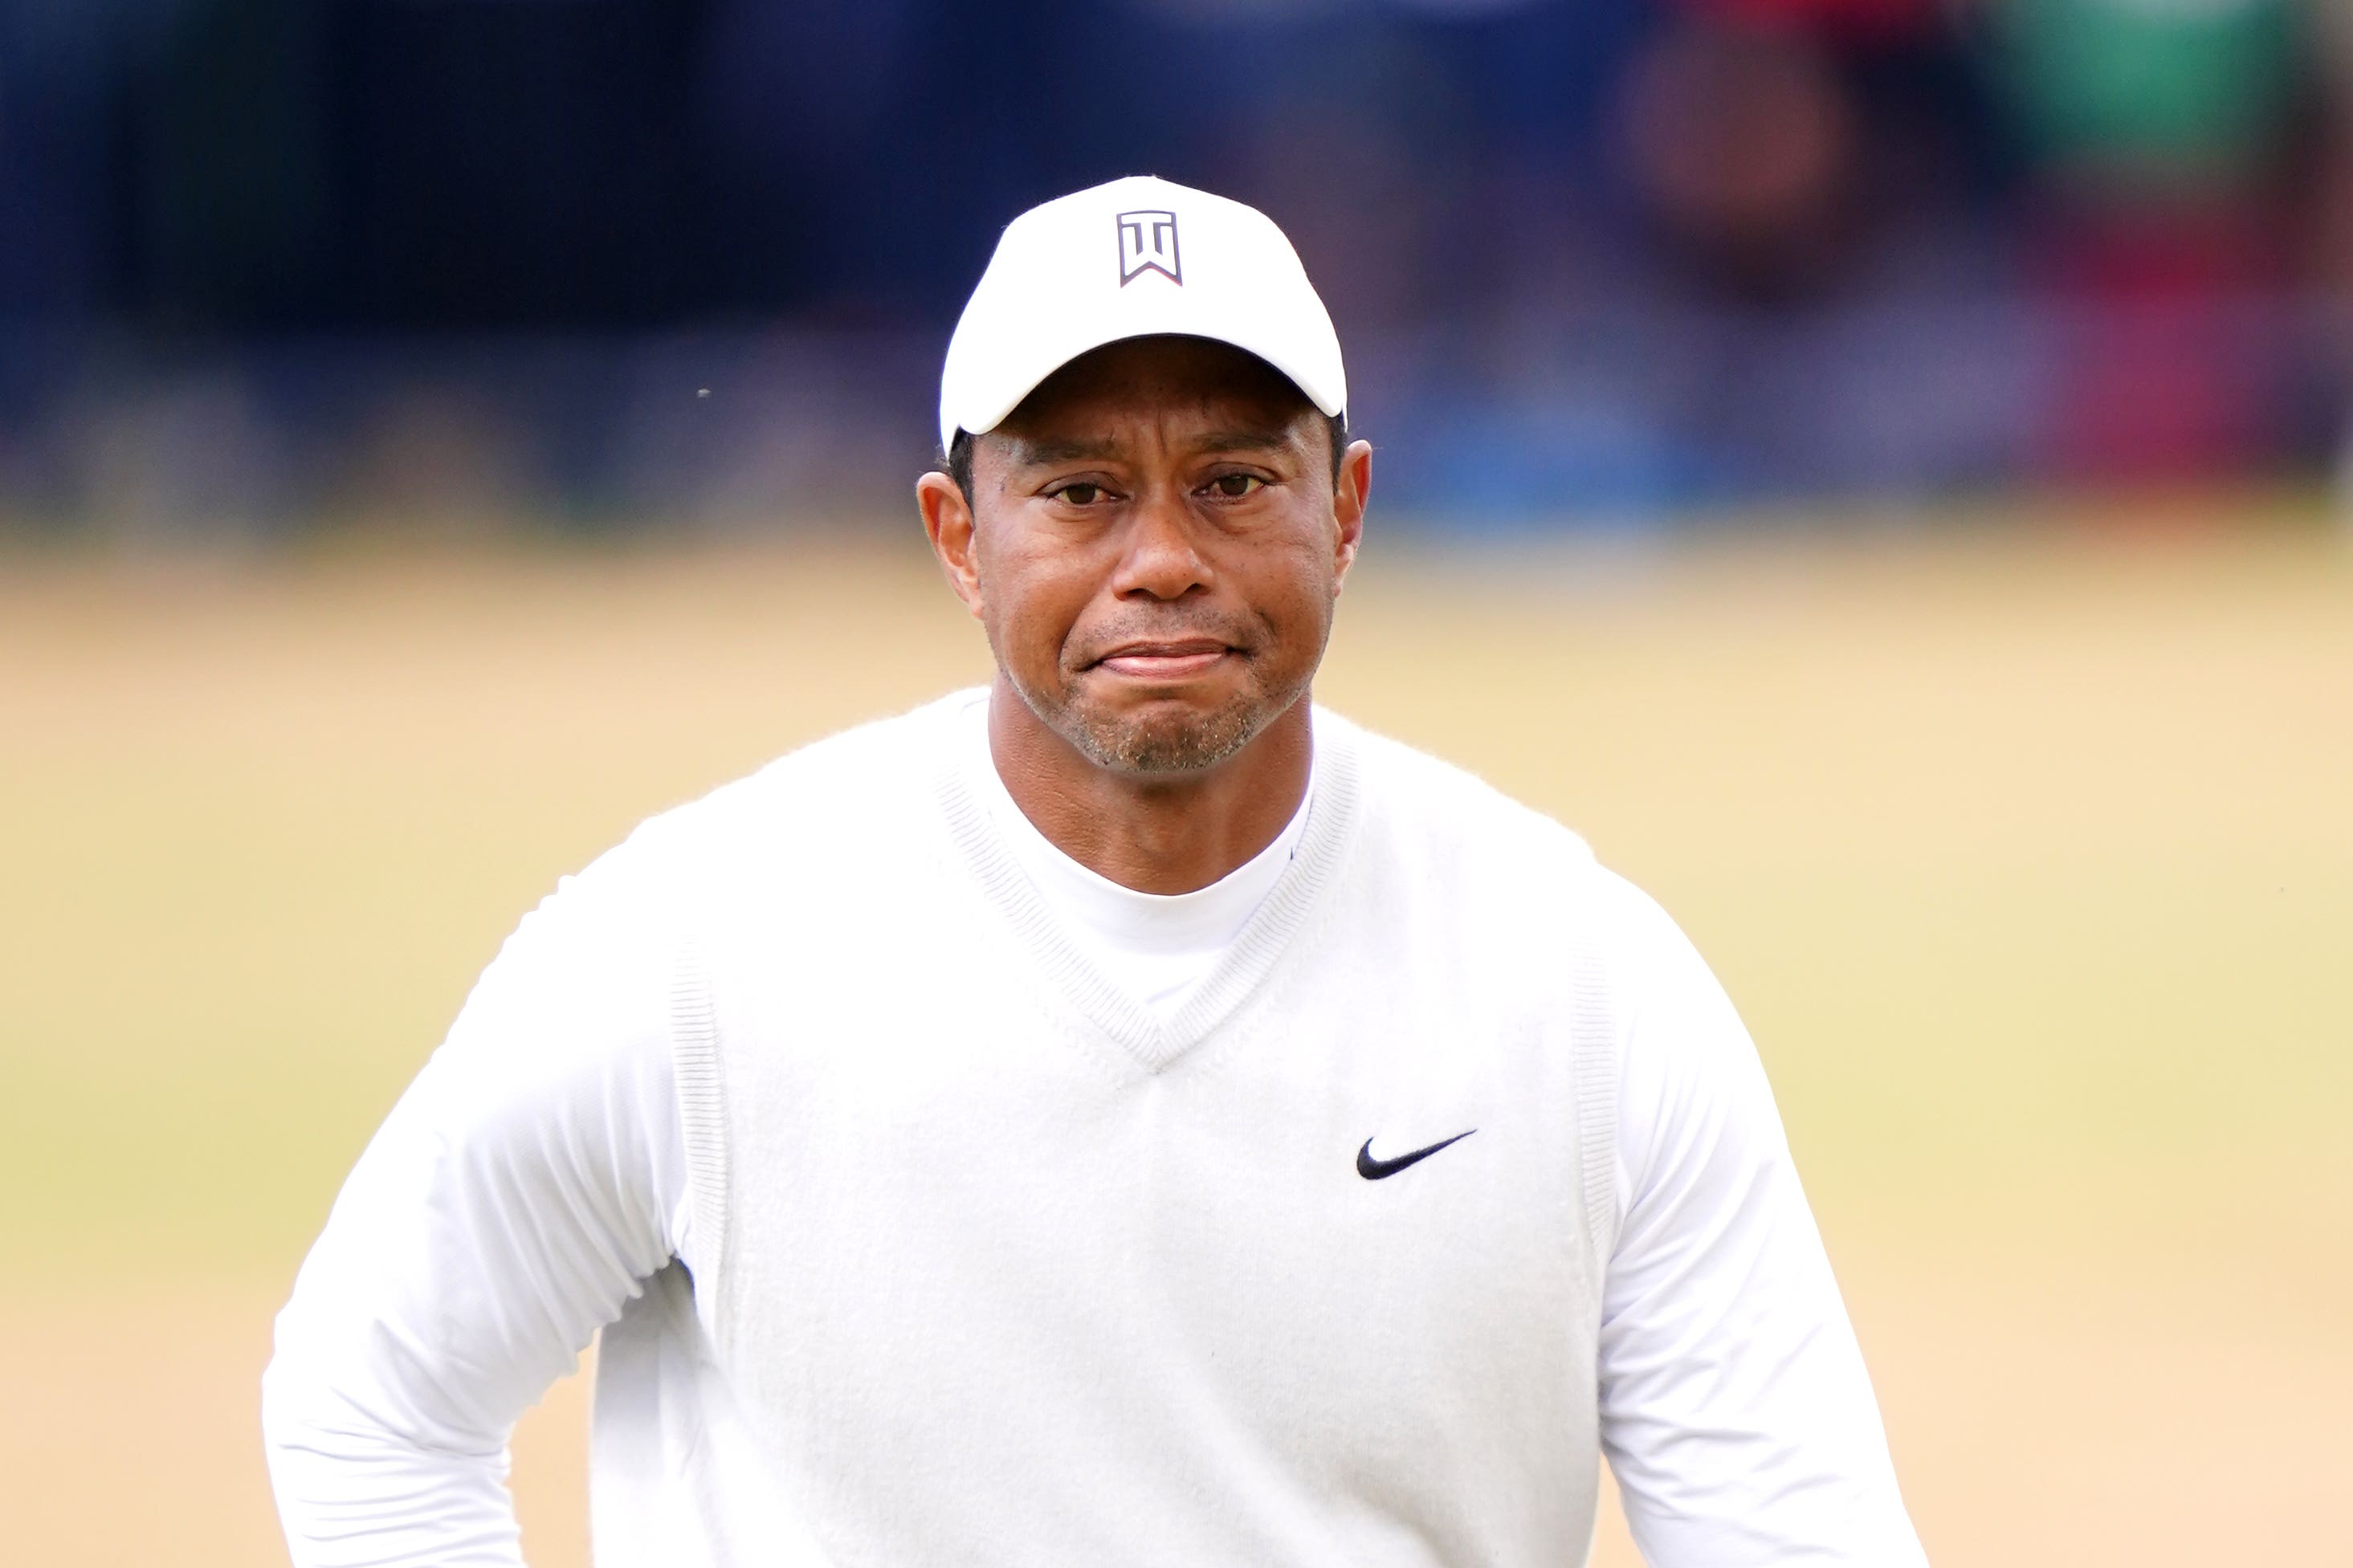 Tiger Woods remains a star name in golf despite infrequent appearances on the PGA Tour